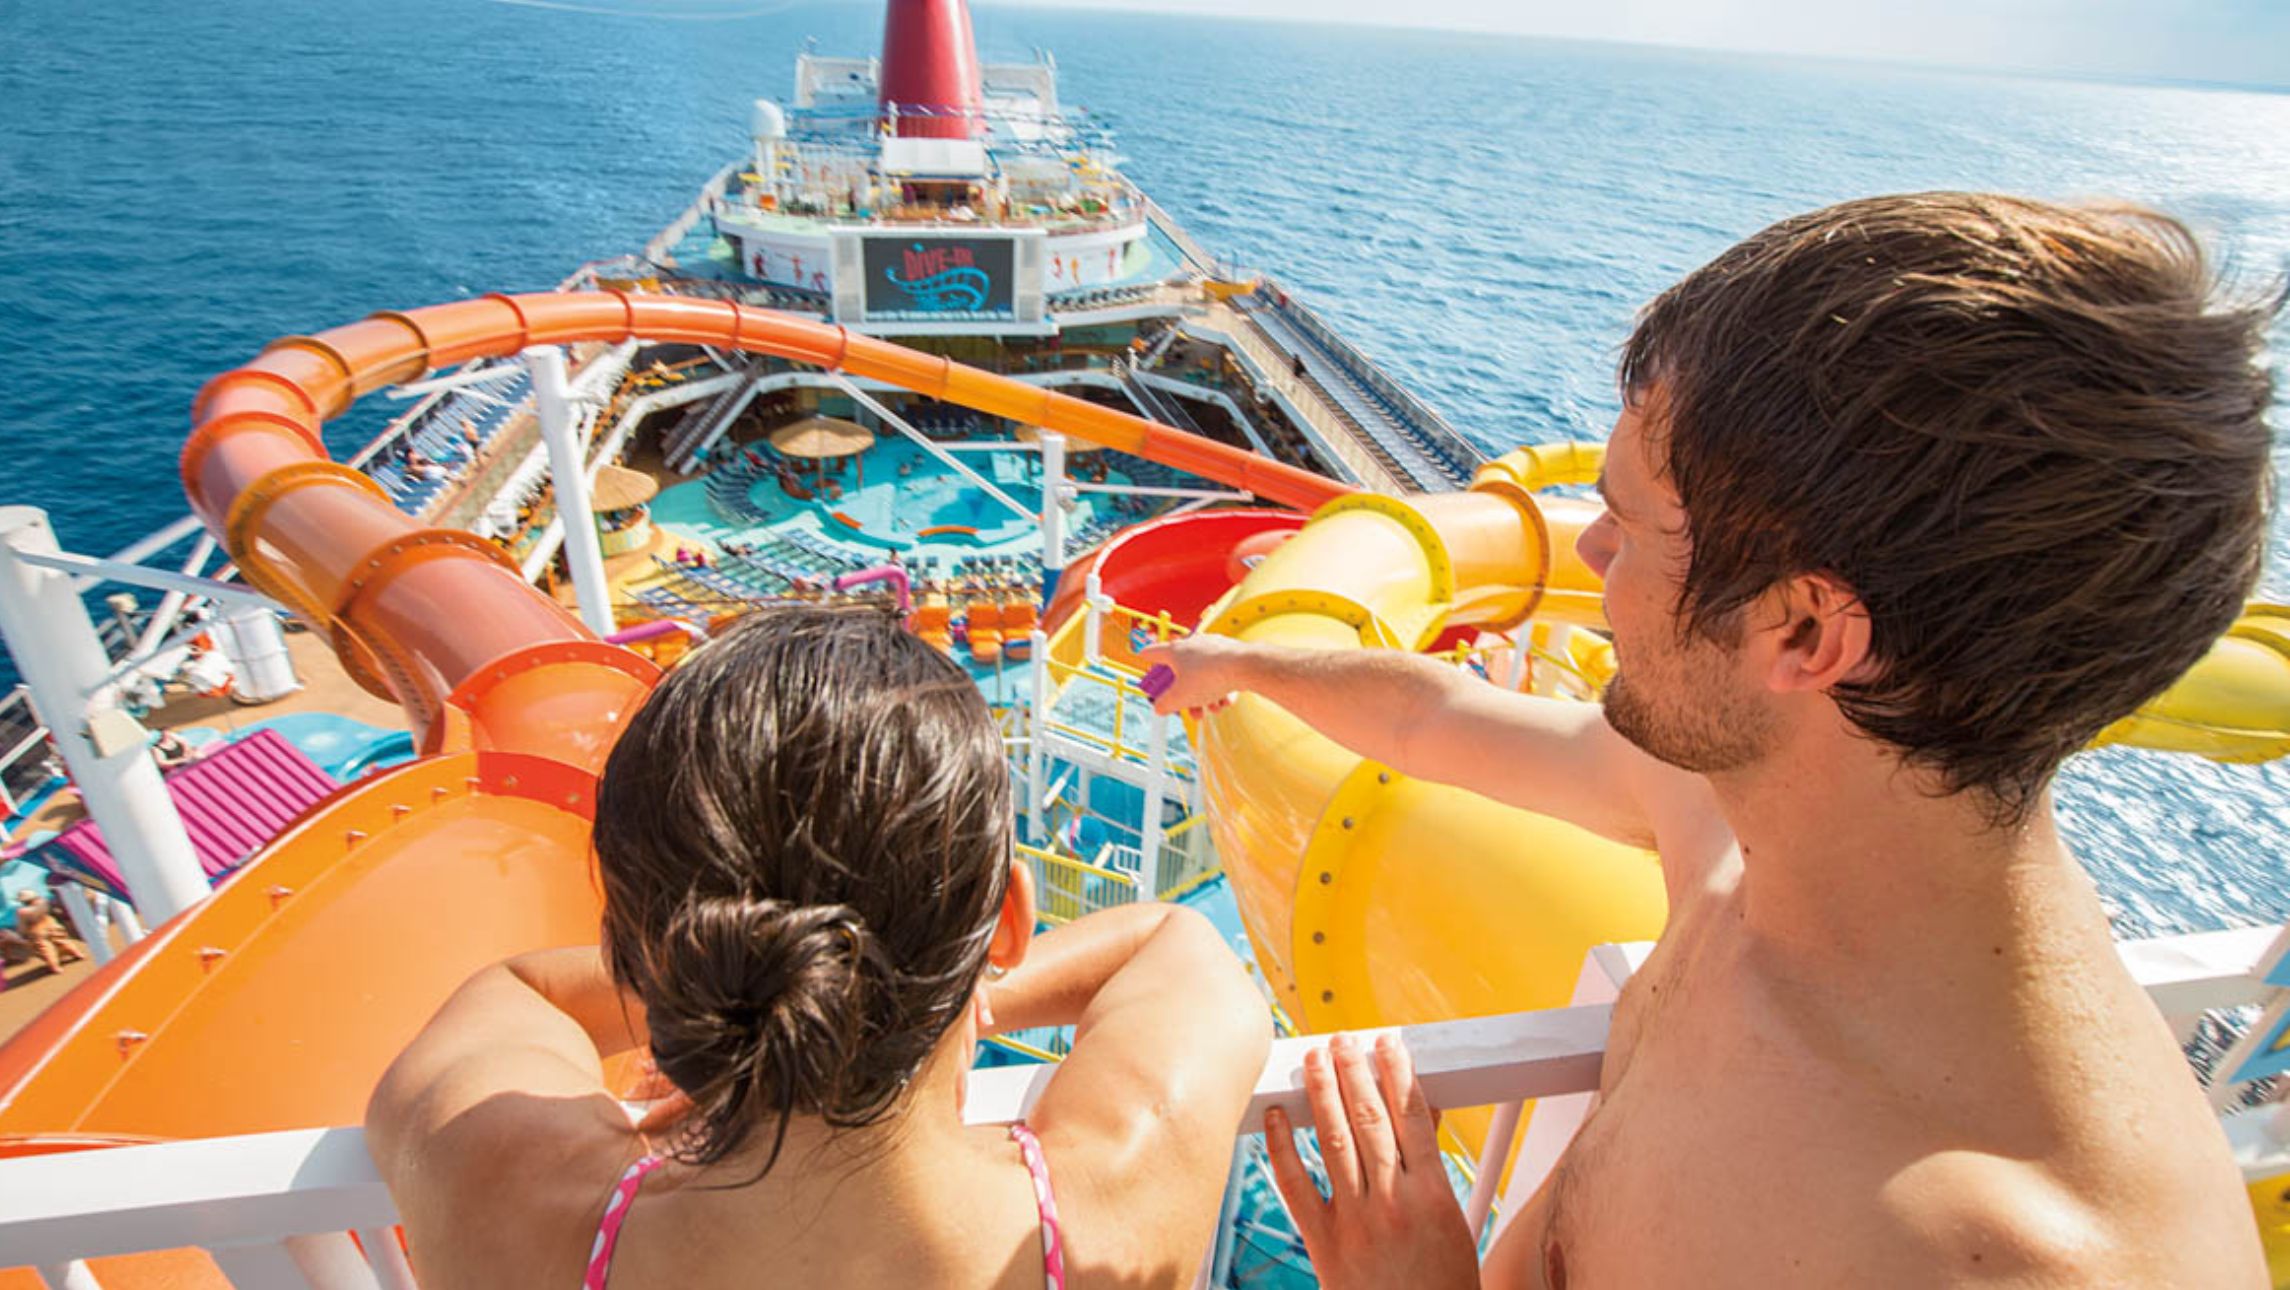 A couple on the Carnival Splendor with waterslide